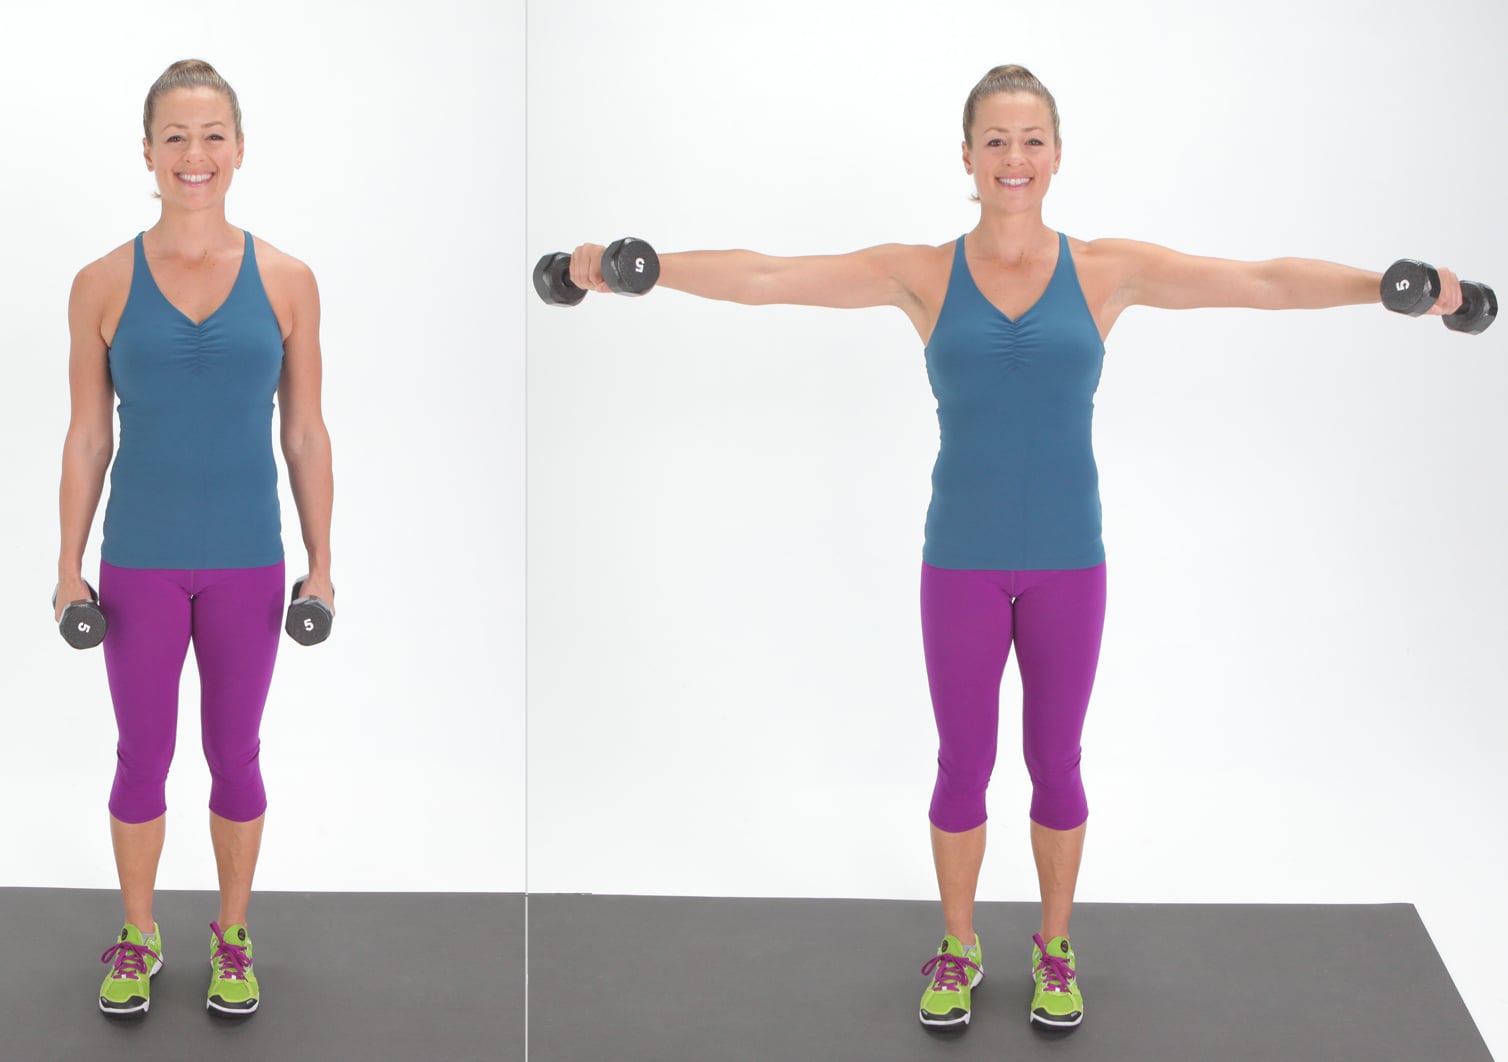 Five Everyday Arm Exercises to Tone up for Your Sleeveless Wedding